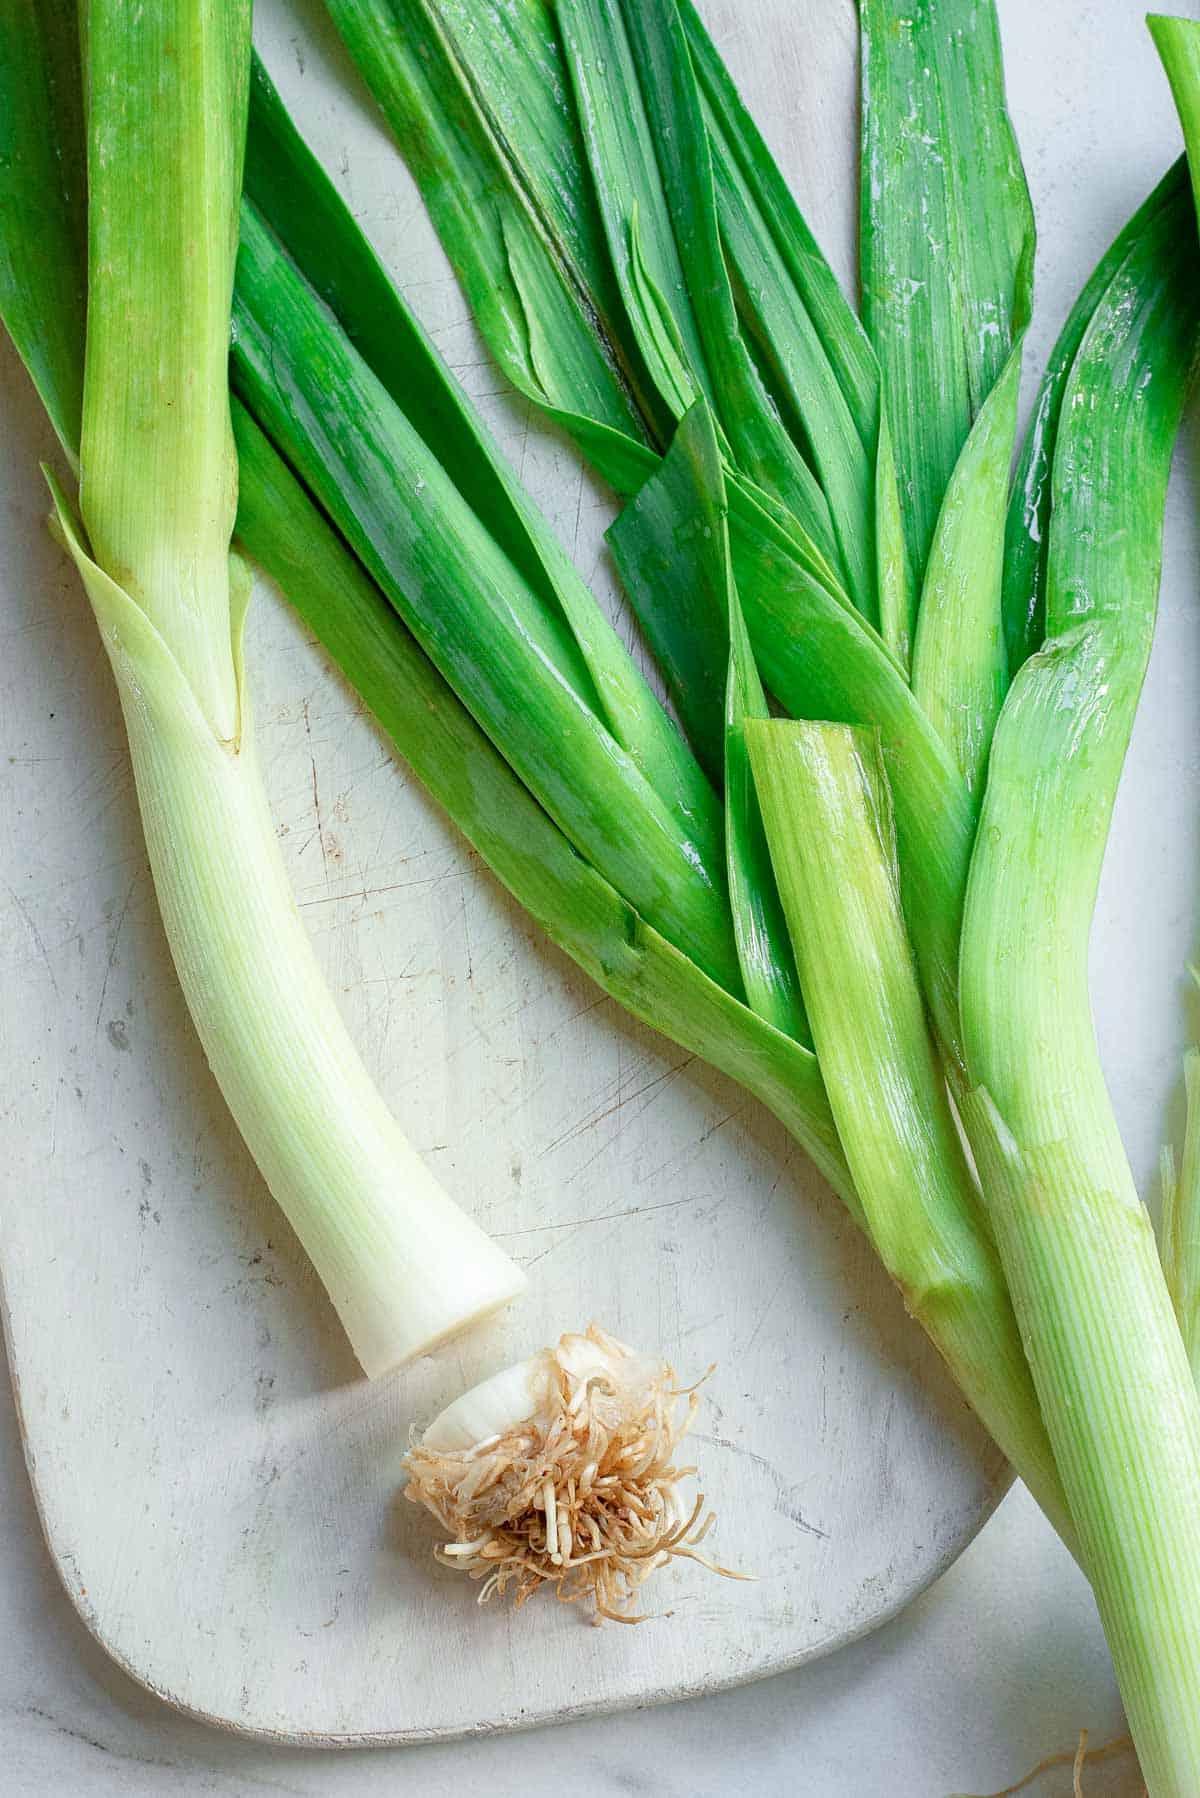 Leeks with the bottom root cut off.